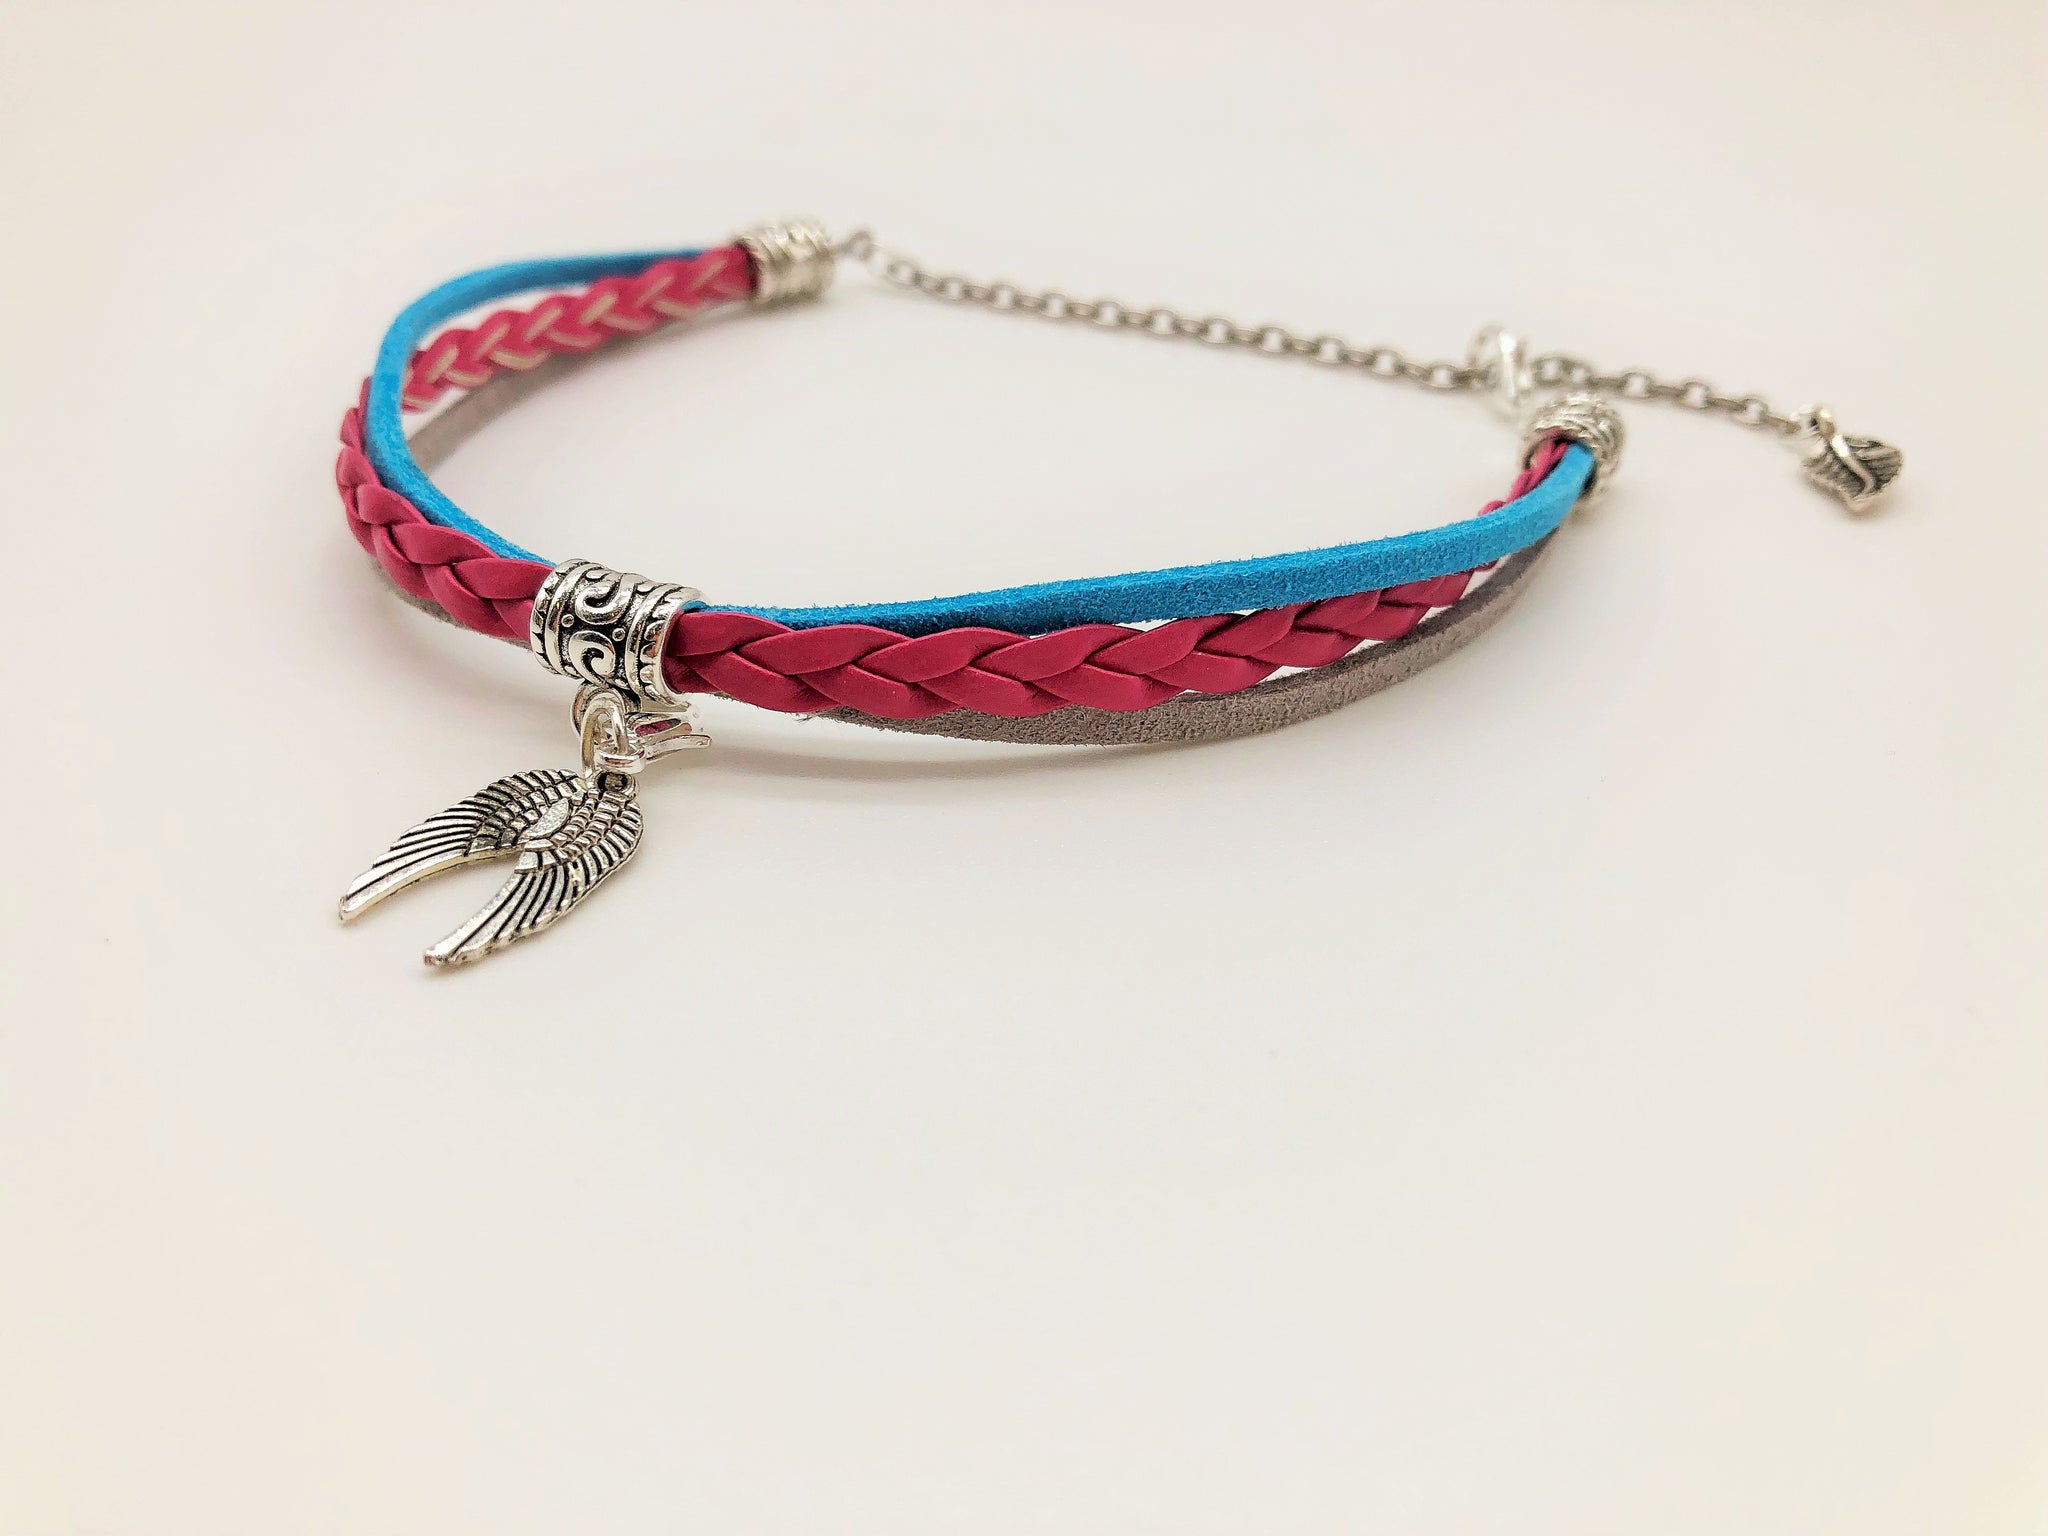 Evening Sky Faux suede & Leather Anklet with Angel Wing charms